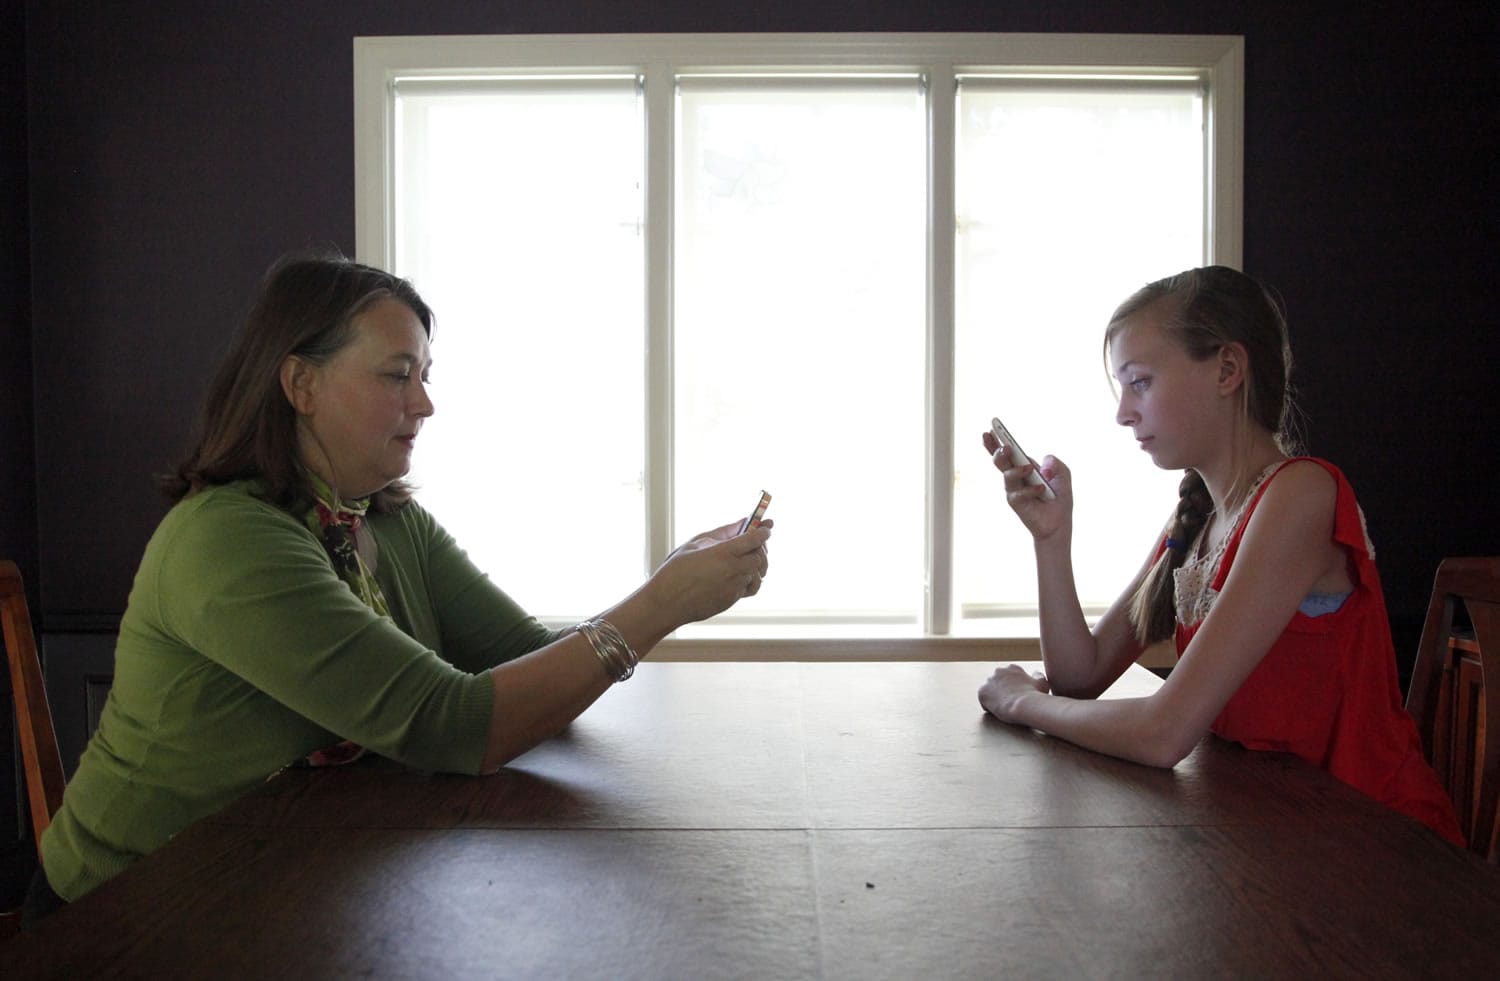 Anna Schiferl, right, and her mother Joanna hold their cellphones in the dining room of their LaGrange, Ill. home on May 24. Statistics from the Pew Internet &amp; American Life Project show that, these days, many people with cell phones prefer texting over a phone call. Itis not always young people, though the data indicates that the younger you are, the more likely you are to prefer texting.